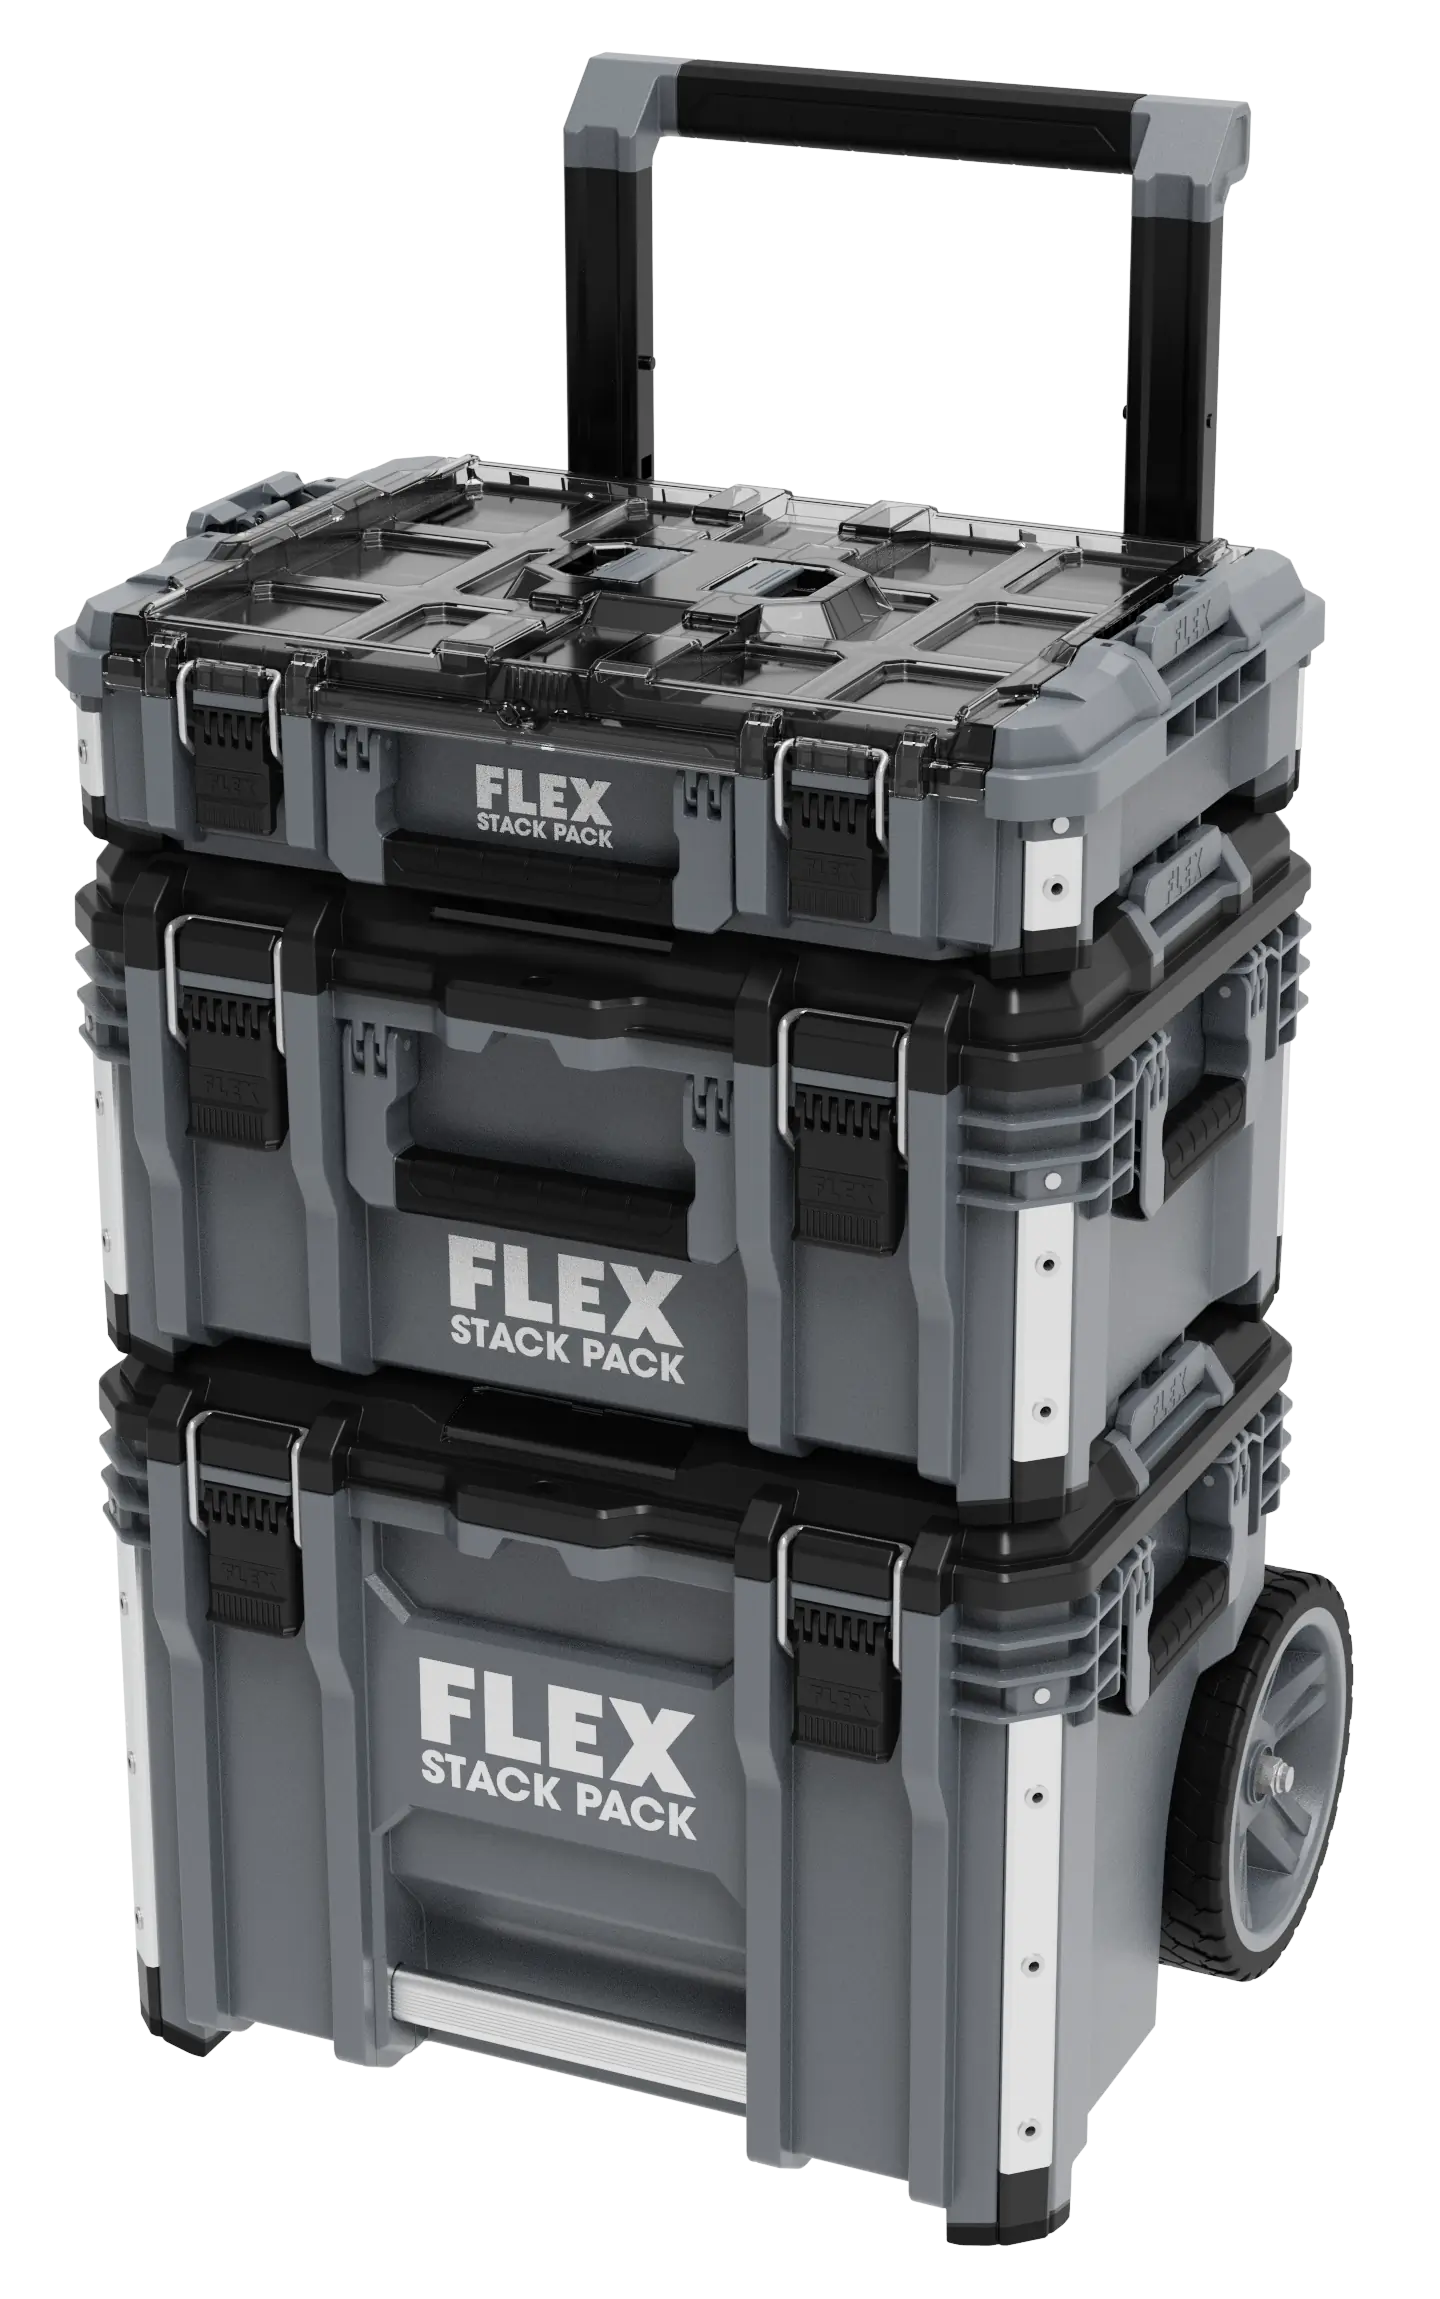 FLEX Stack Pack Suitcase Tool Box